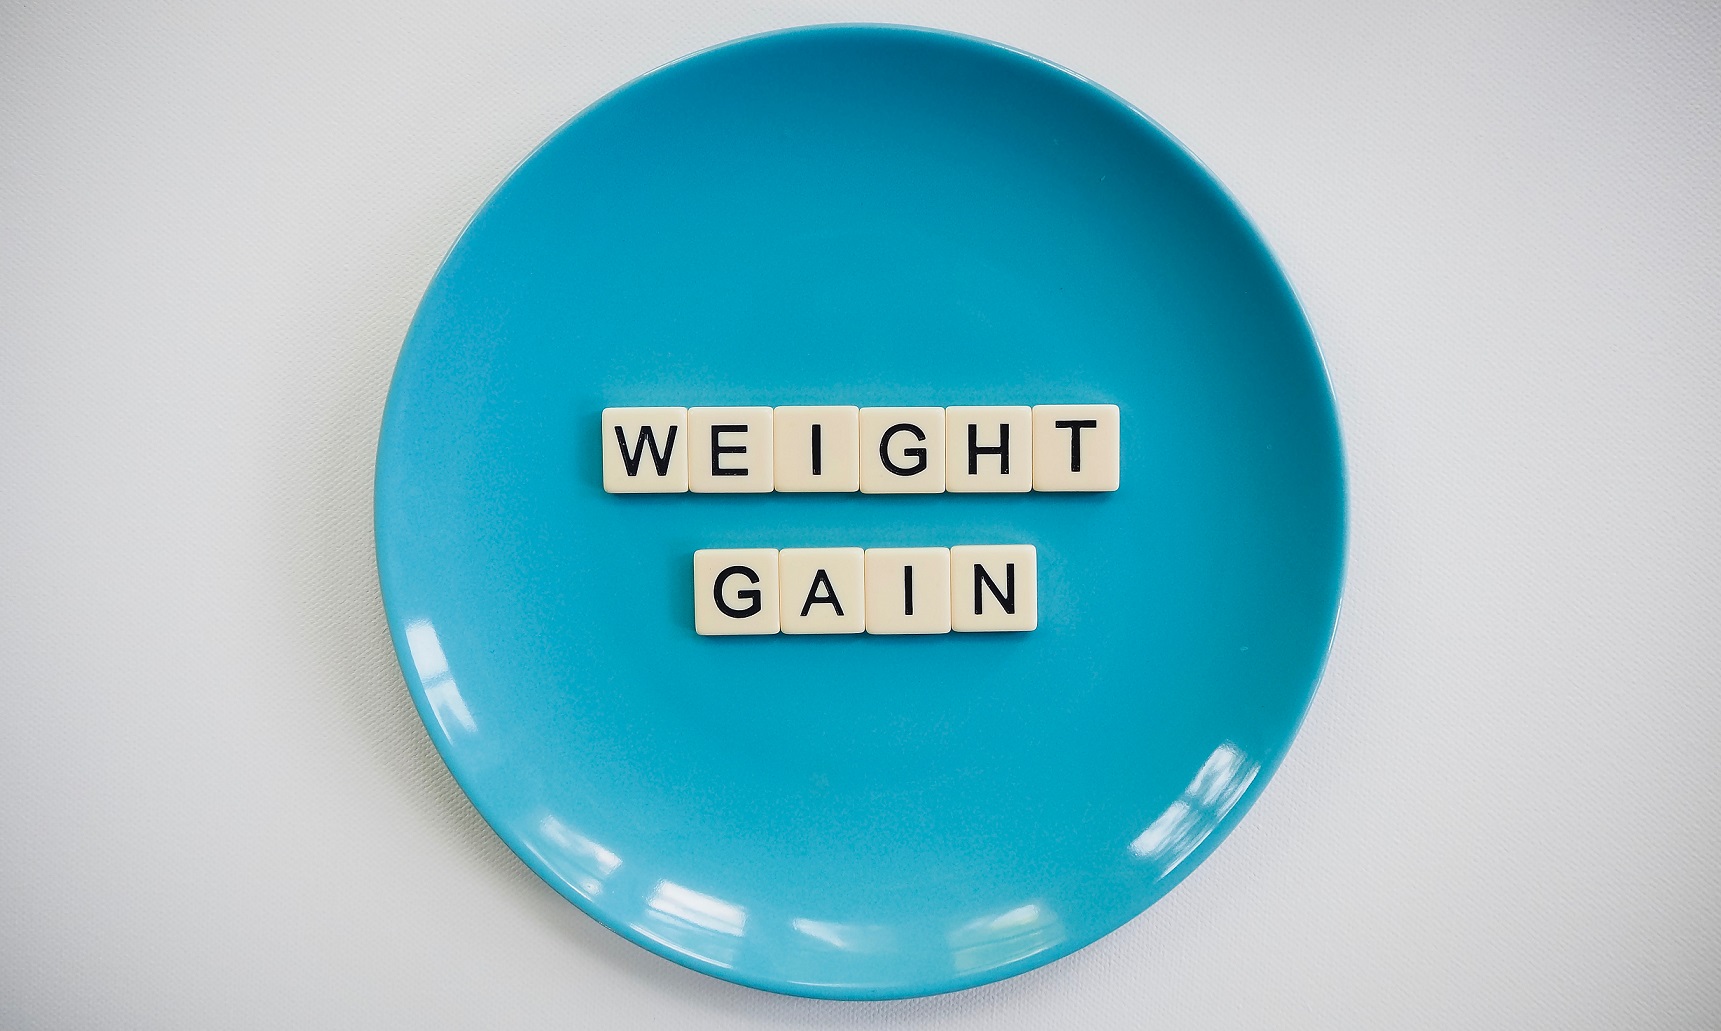 Metformin Should be 'Protocolized' for Anti-Psychotic Weight Gain